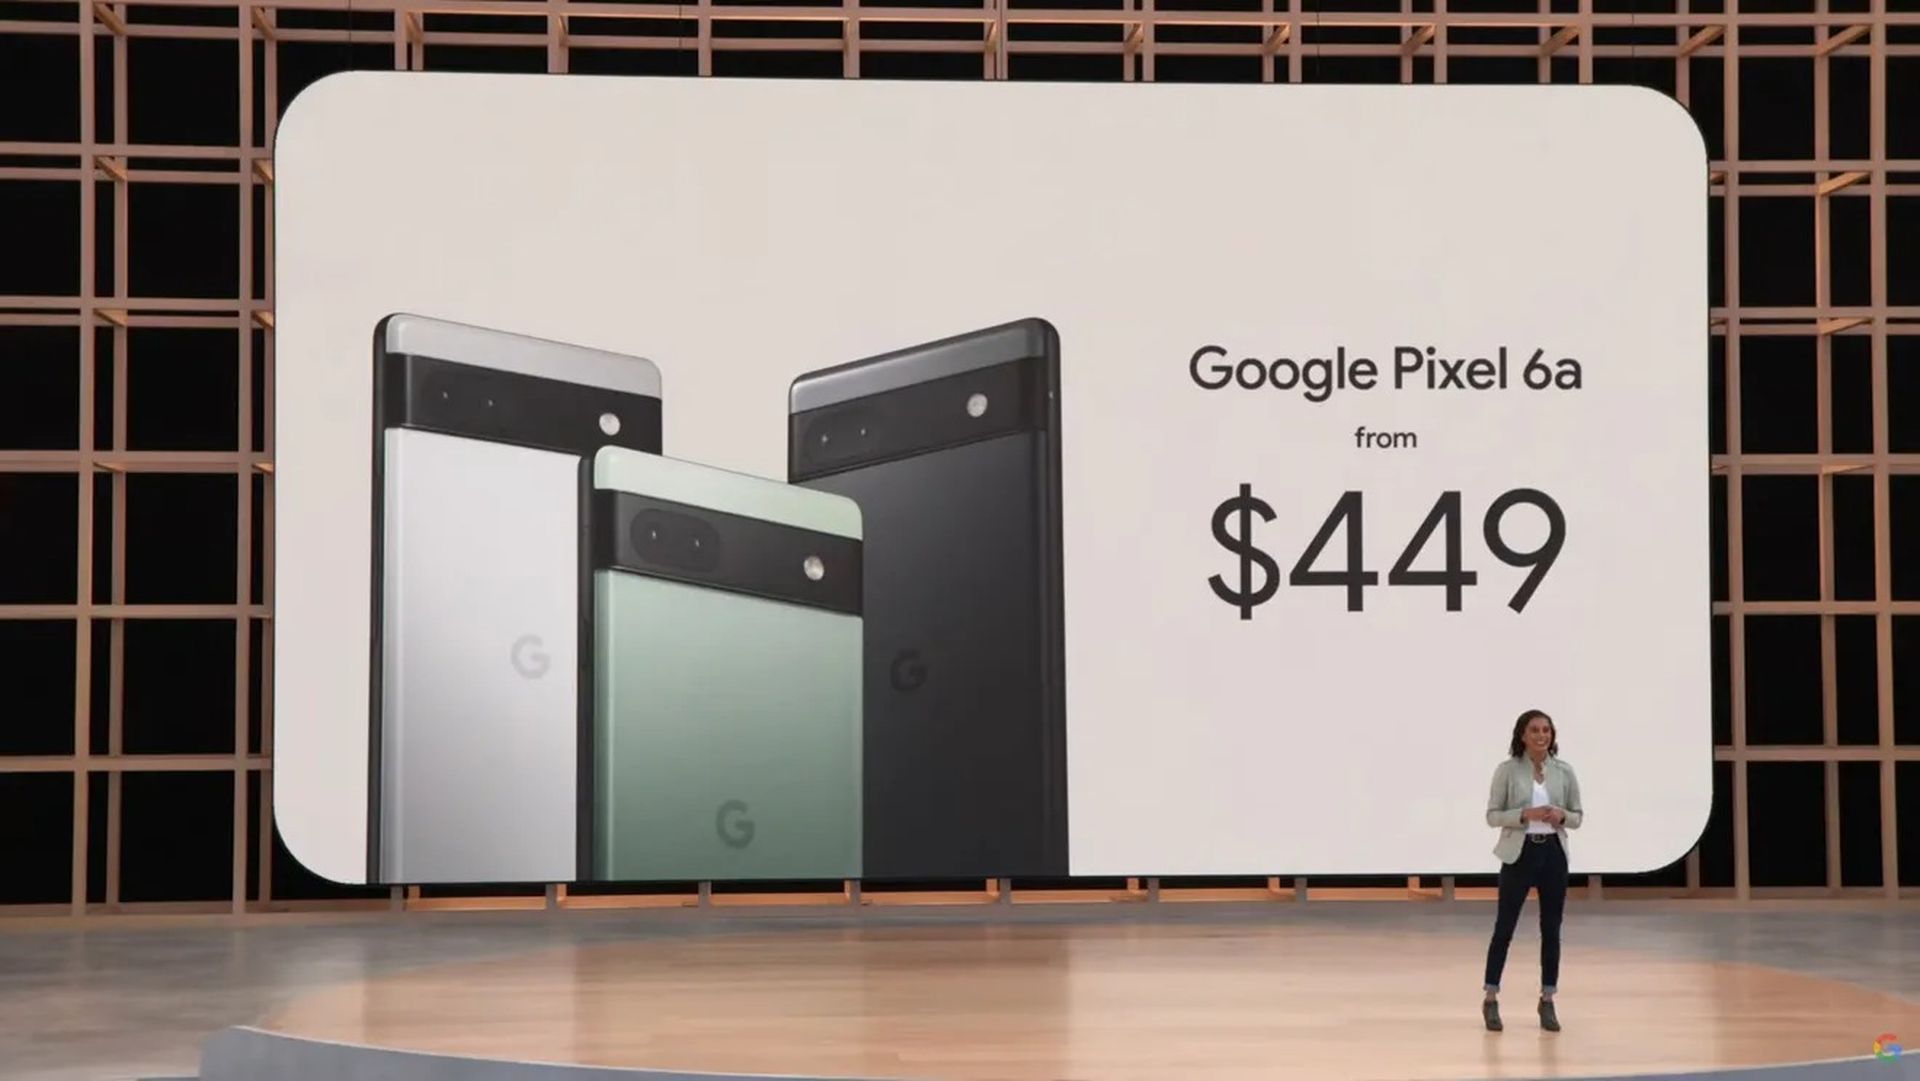 Google IO 2022 revealed some interesting products and we learned a lot about the company's point of view about AI, Android 13 and surely, Pixel phones. The company is also planning to release a Pixel tablet.